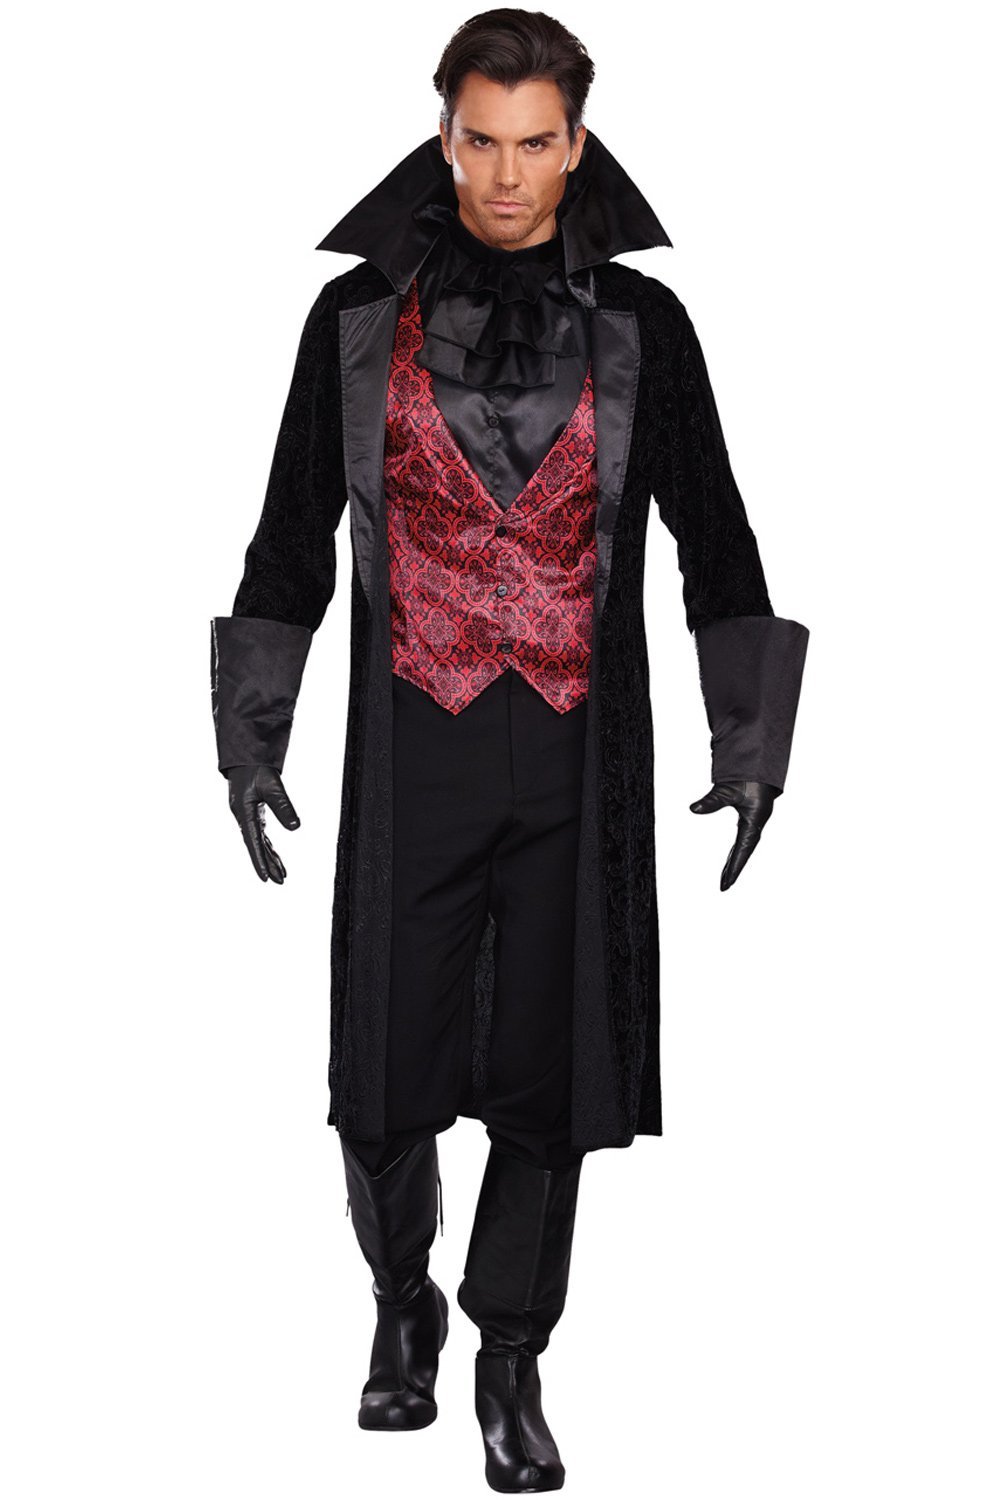 Dreamgirl Men's Bloody Handsome Costume, Black/Red, Large